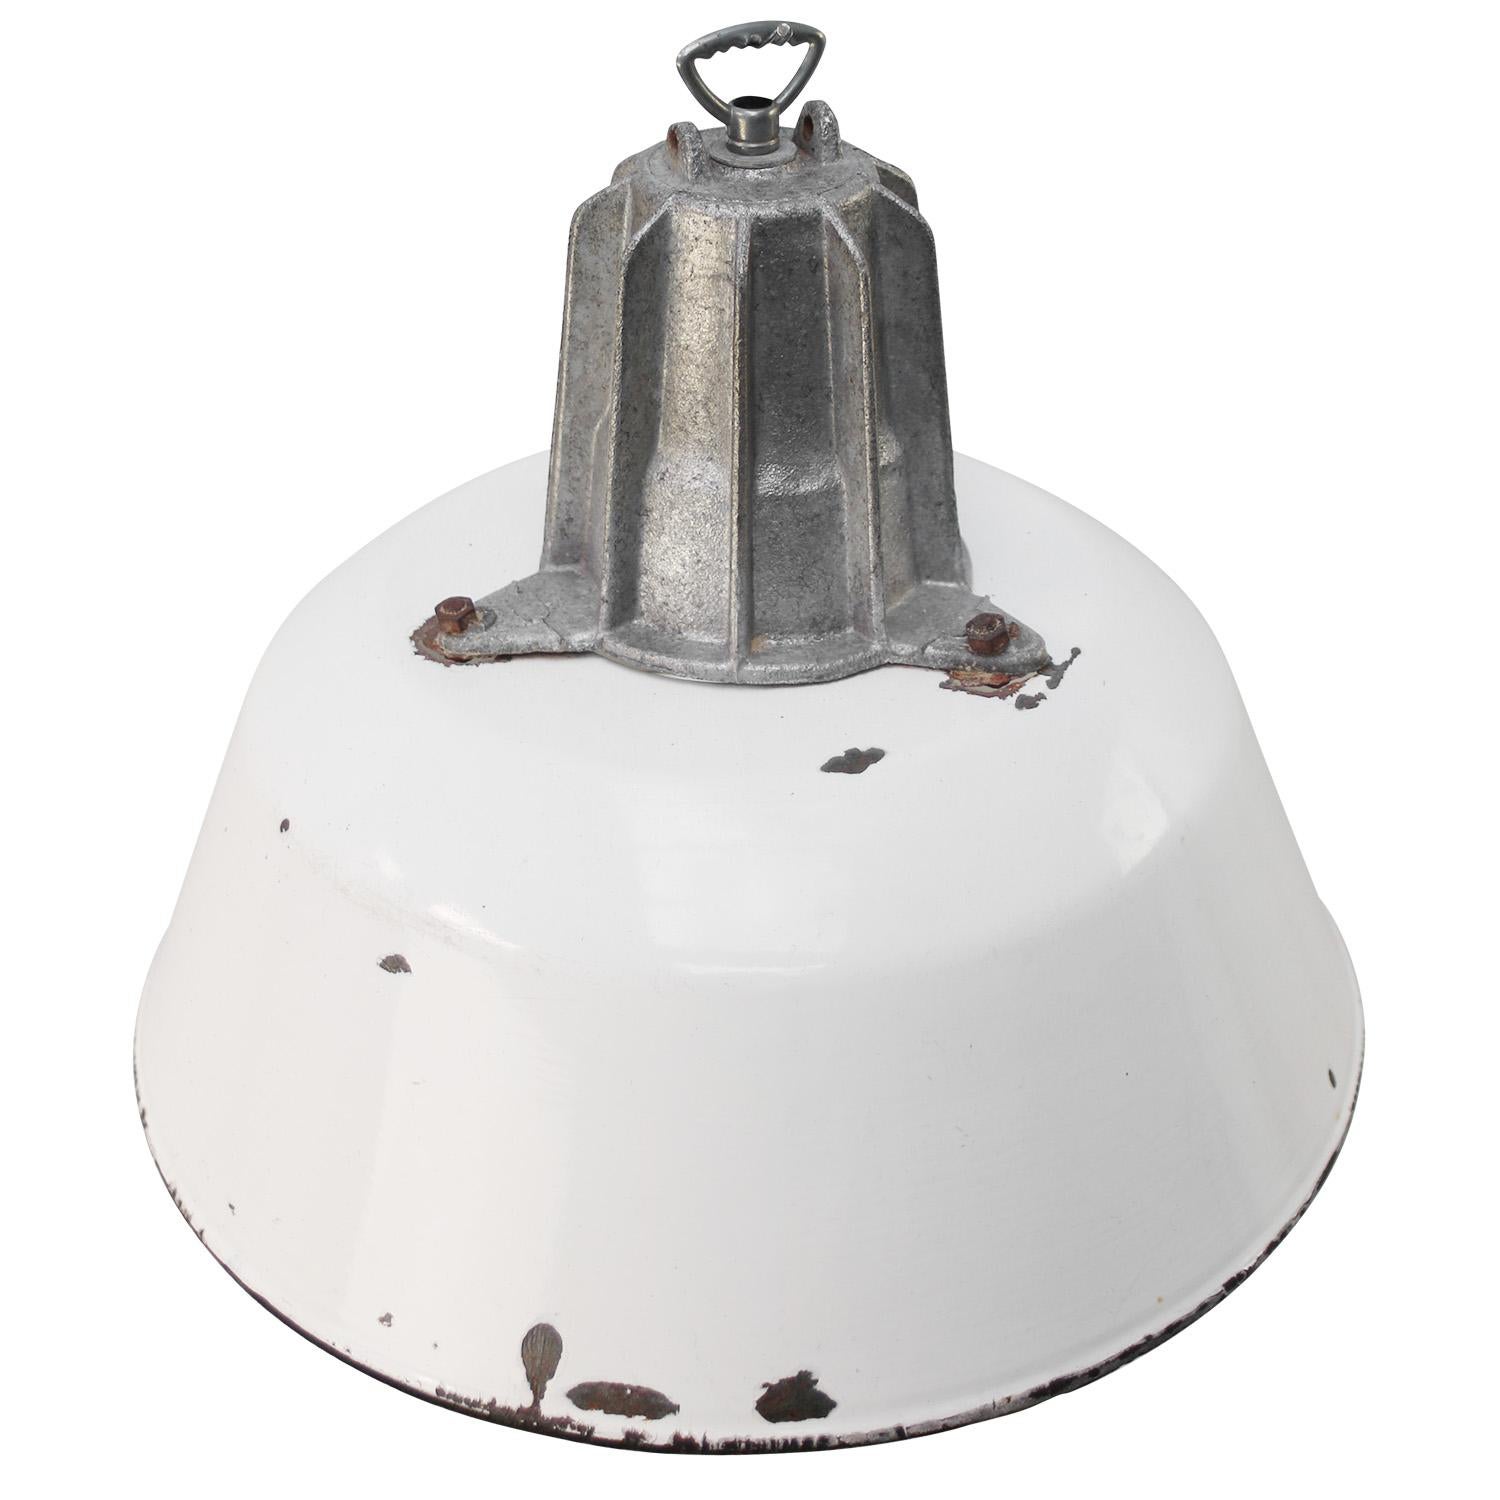 Industrial hanging lamp. White enamel. White interior.
Cast aluminium top.

Weight: 2.0 kg / 4.4 lb

Priced per individual item. All lamps have been made suitable by international standards for incandescent light bulbs, energy-efficient and LED